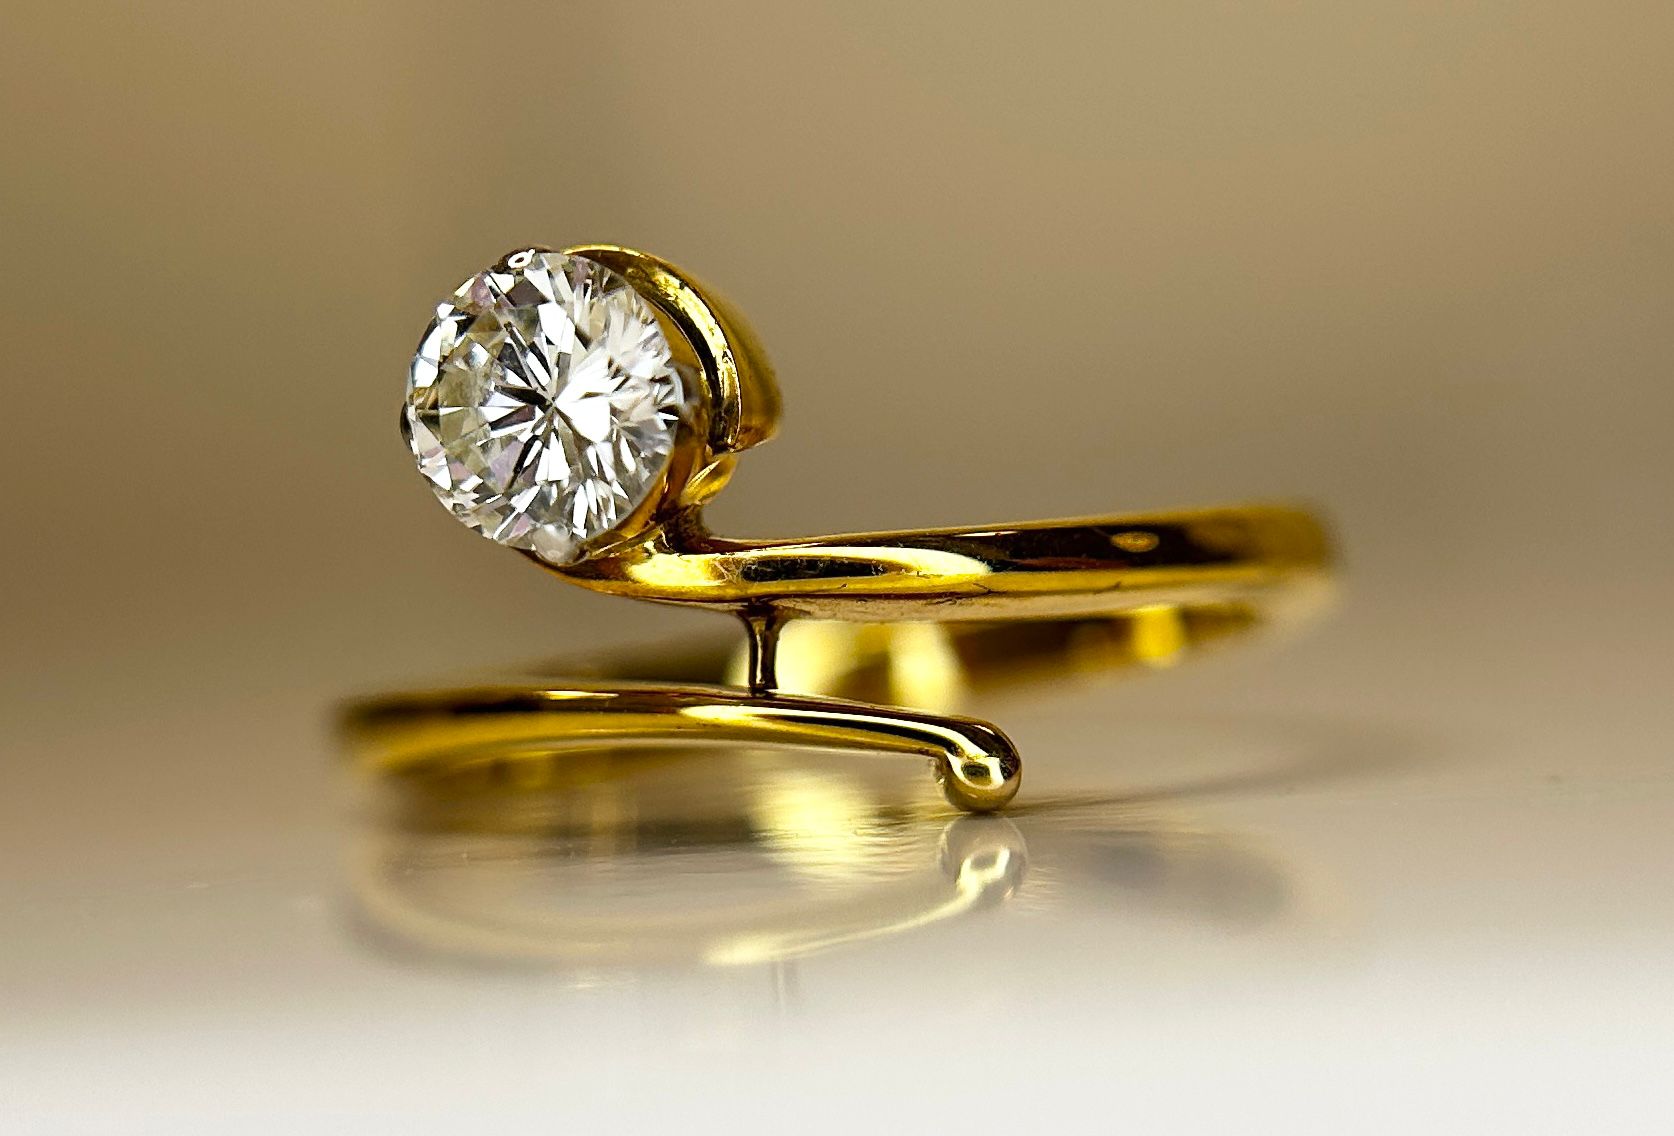 Beautiful Natural 0.30 CT VVS Diamond Ring With 18k Gold - Image 3 of 6